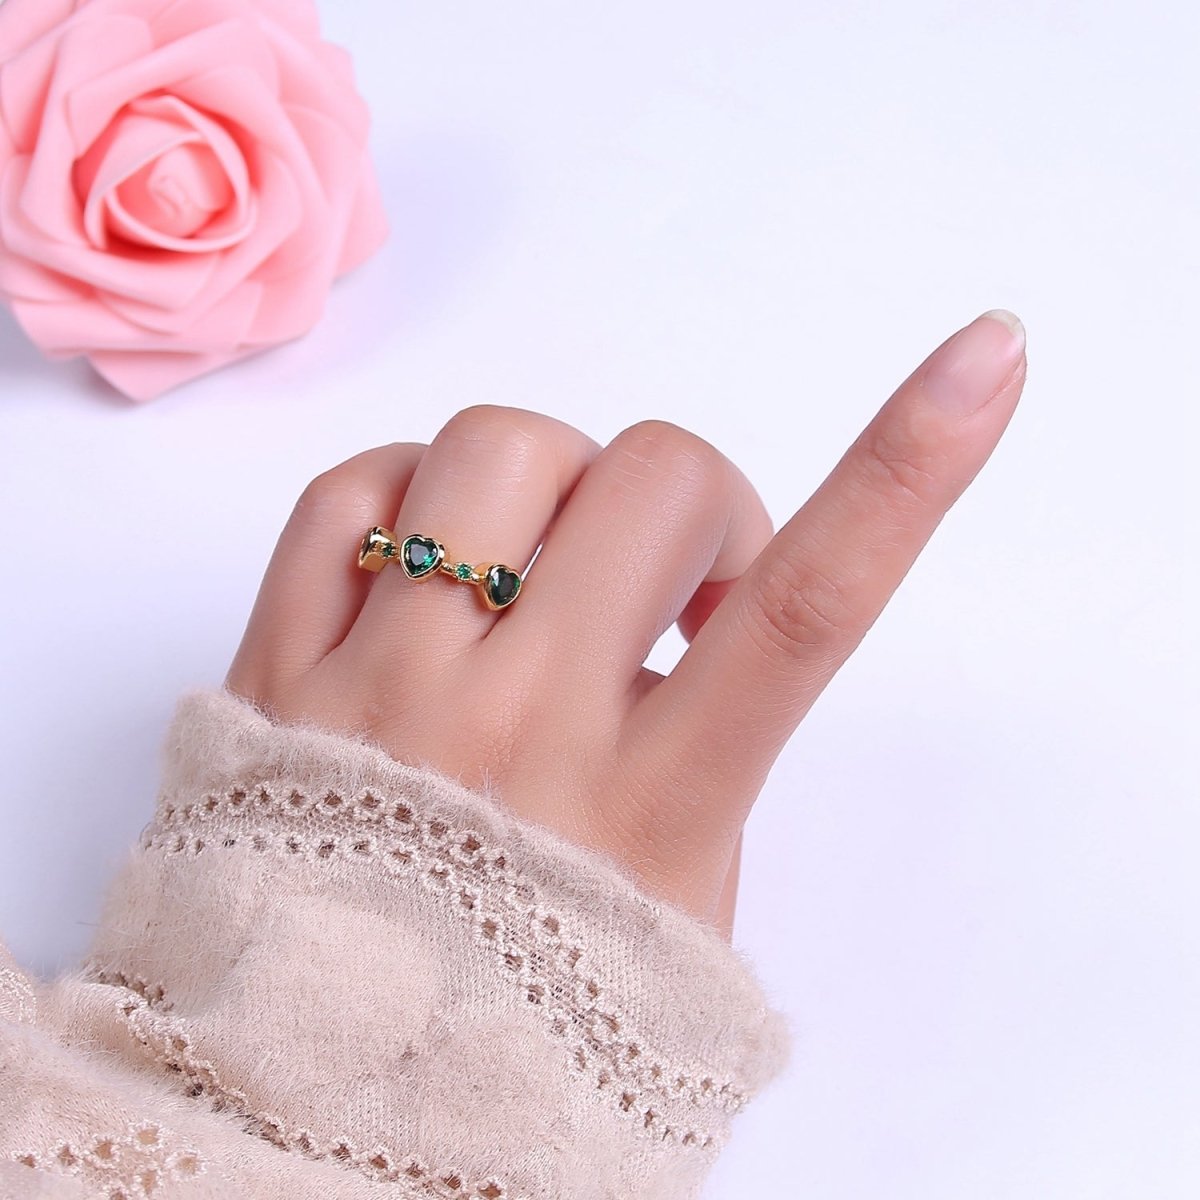 Green Emerald Cz Heart Ring Open Adjustable Ring O-2039 - DLUXCA